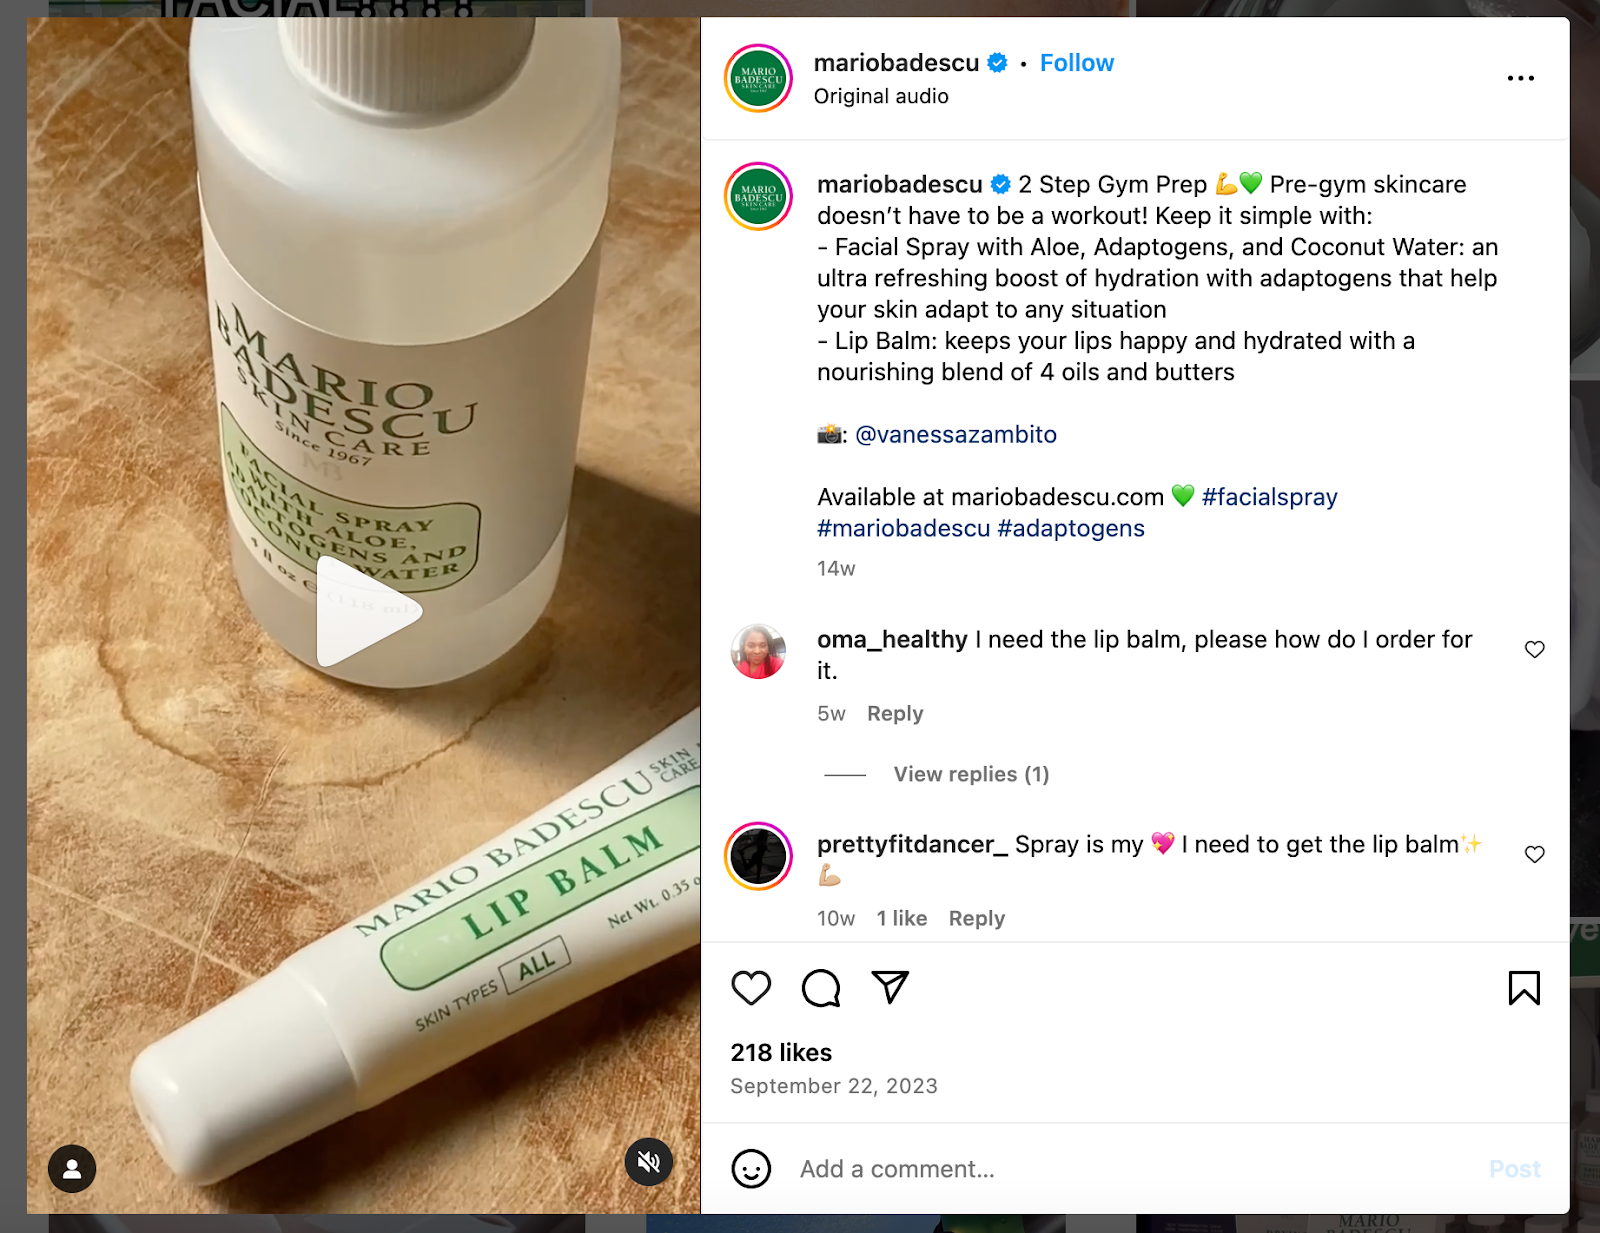 An Instagram post from Mario Badescu